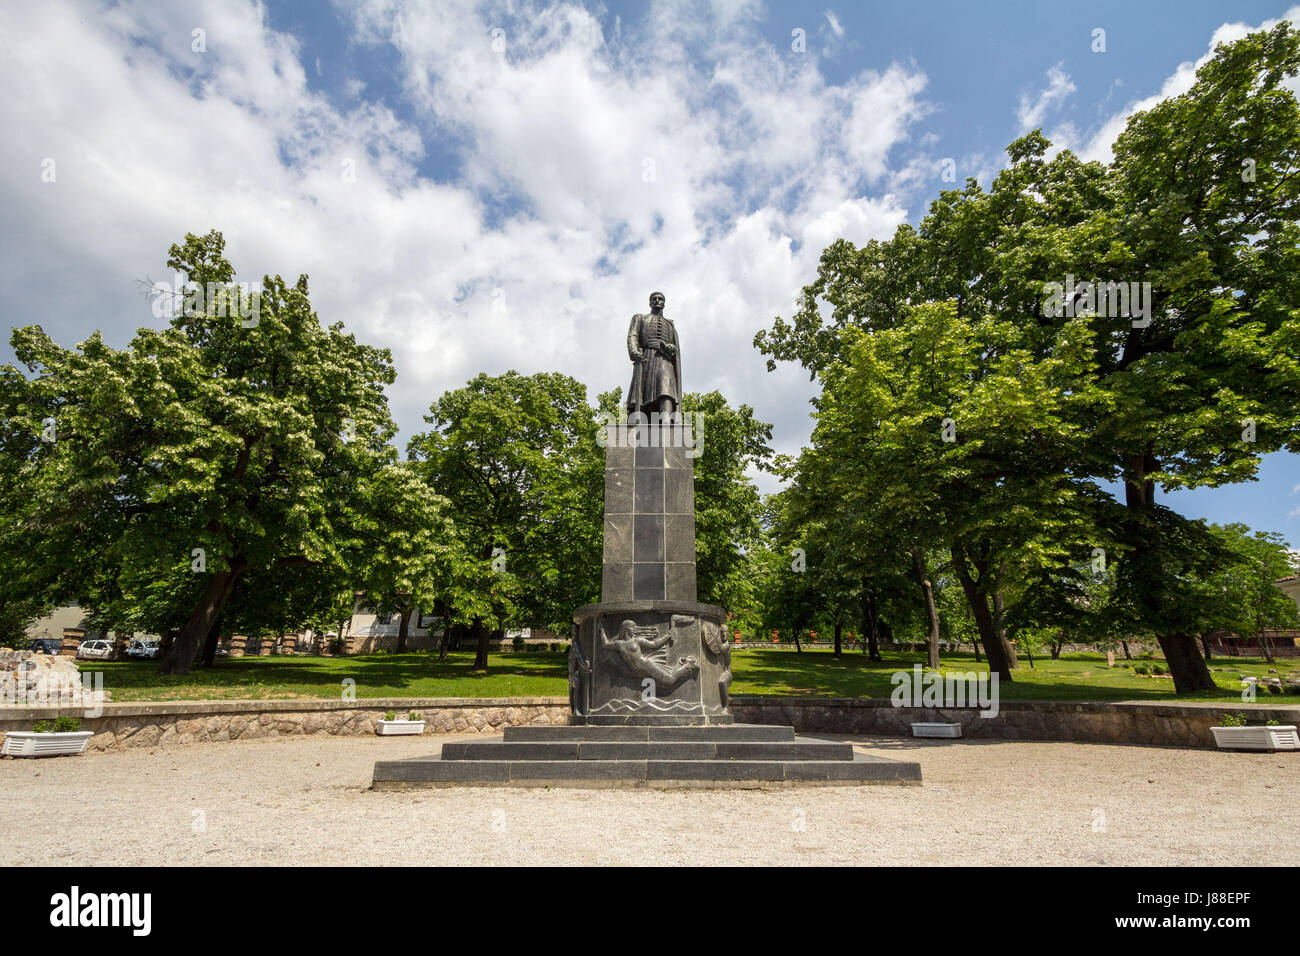 TOPOLA, SERBIA - MAY 27, 2017: Statue dedicated to the first Serbian King, Karadjordje, in the museum dedicated to his history in Topola, Oplenac.  Pi Stock Photo